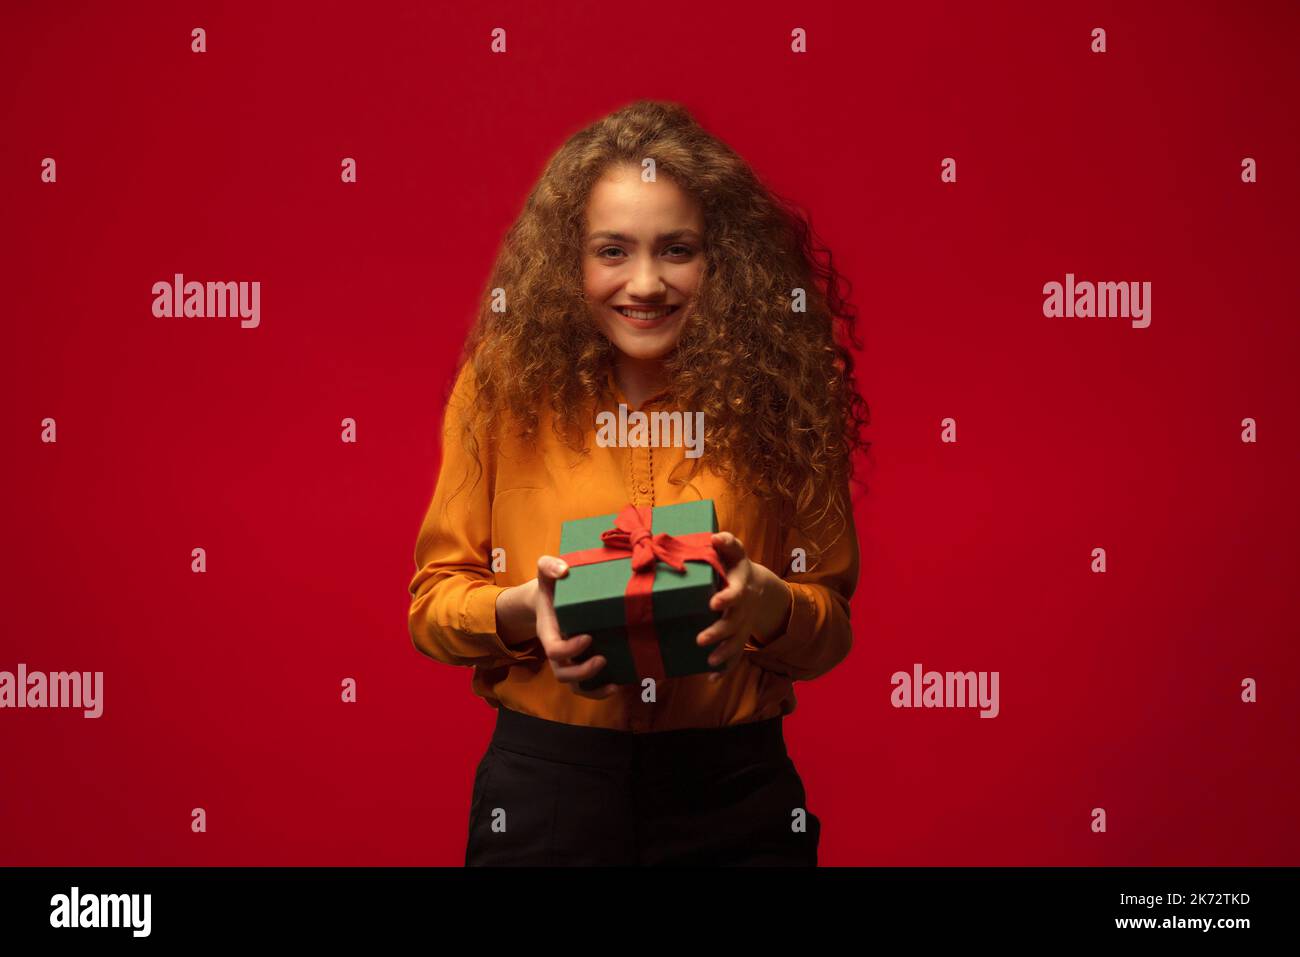 Portrait of happy young woman holding gift box, red background. Stock Photo